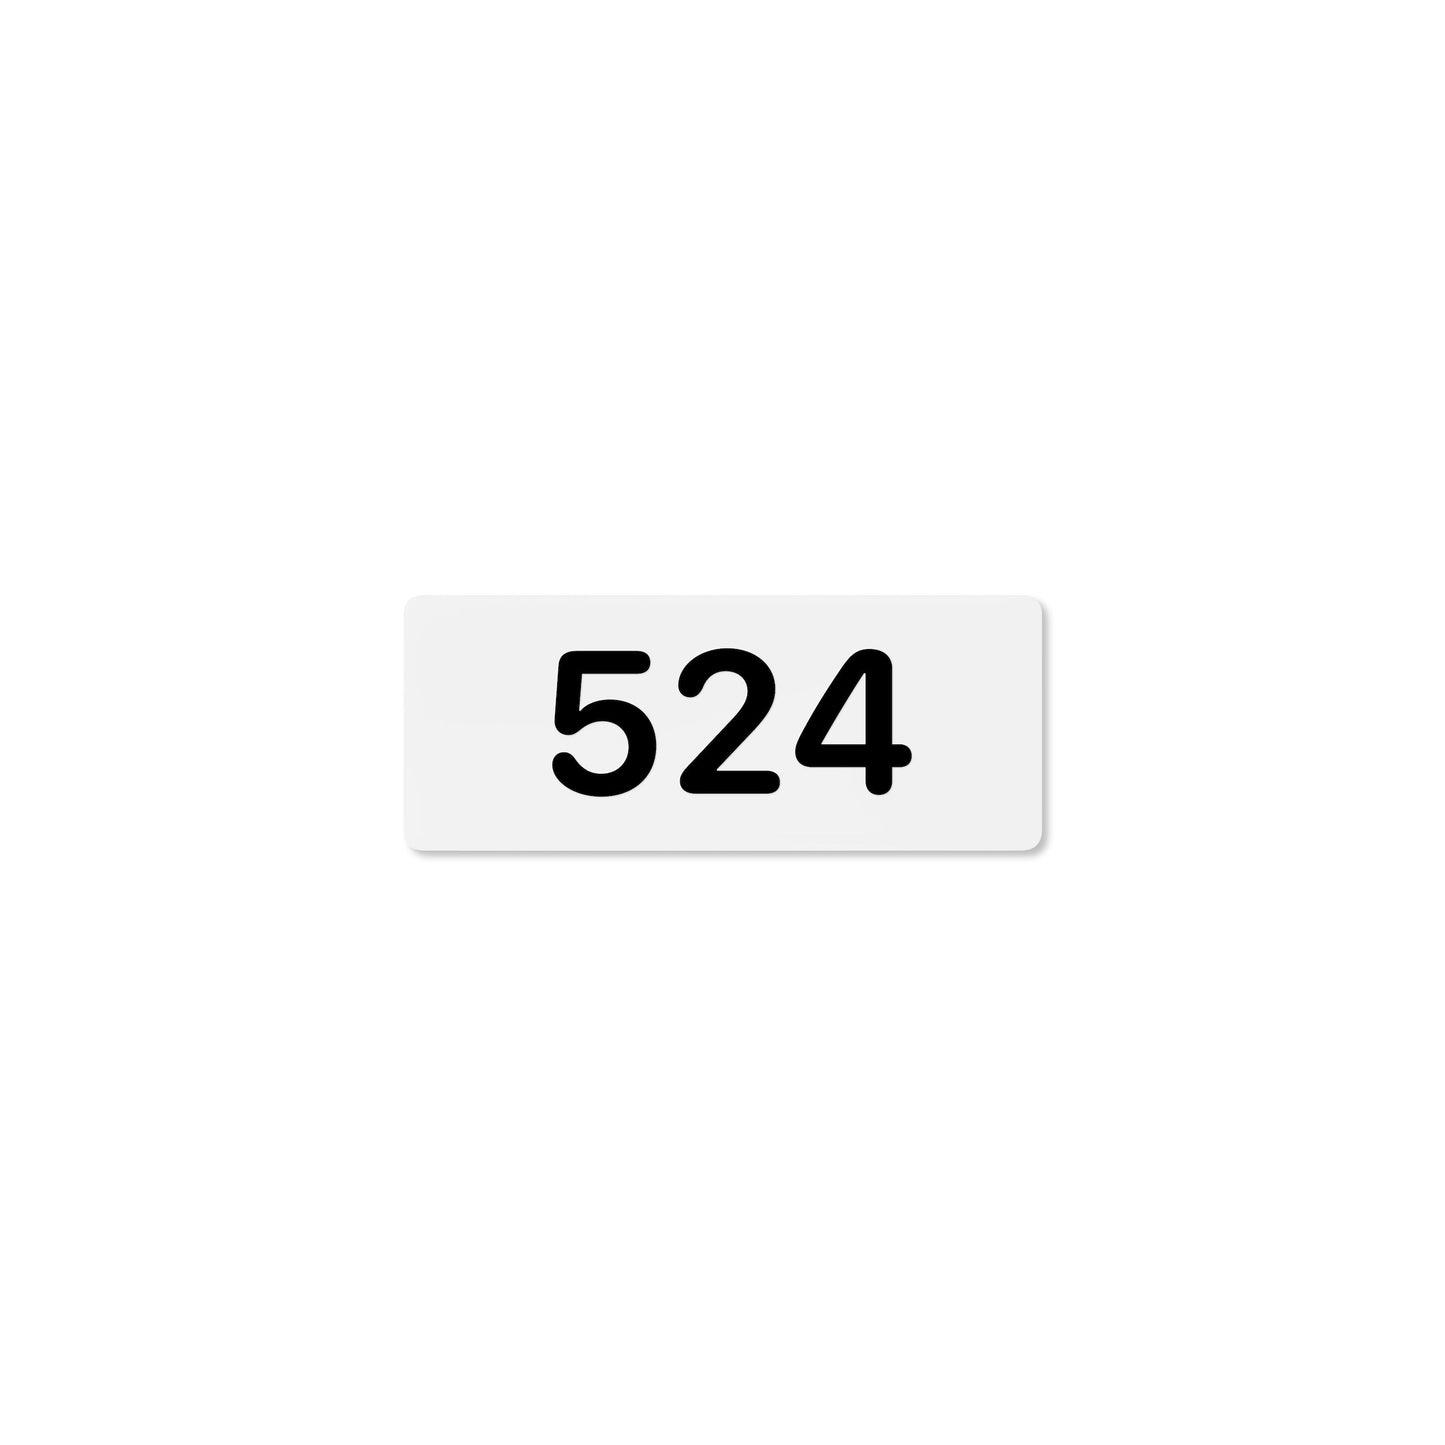 Numeral 524